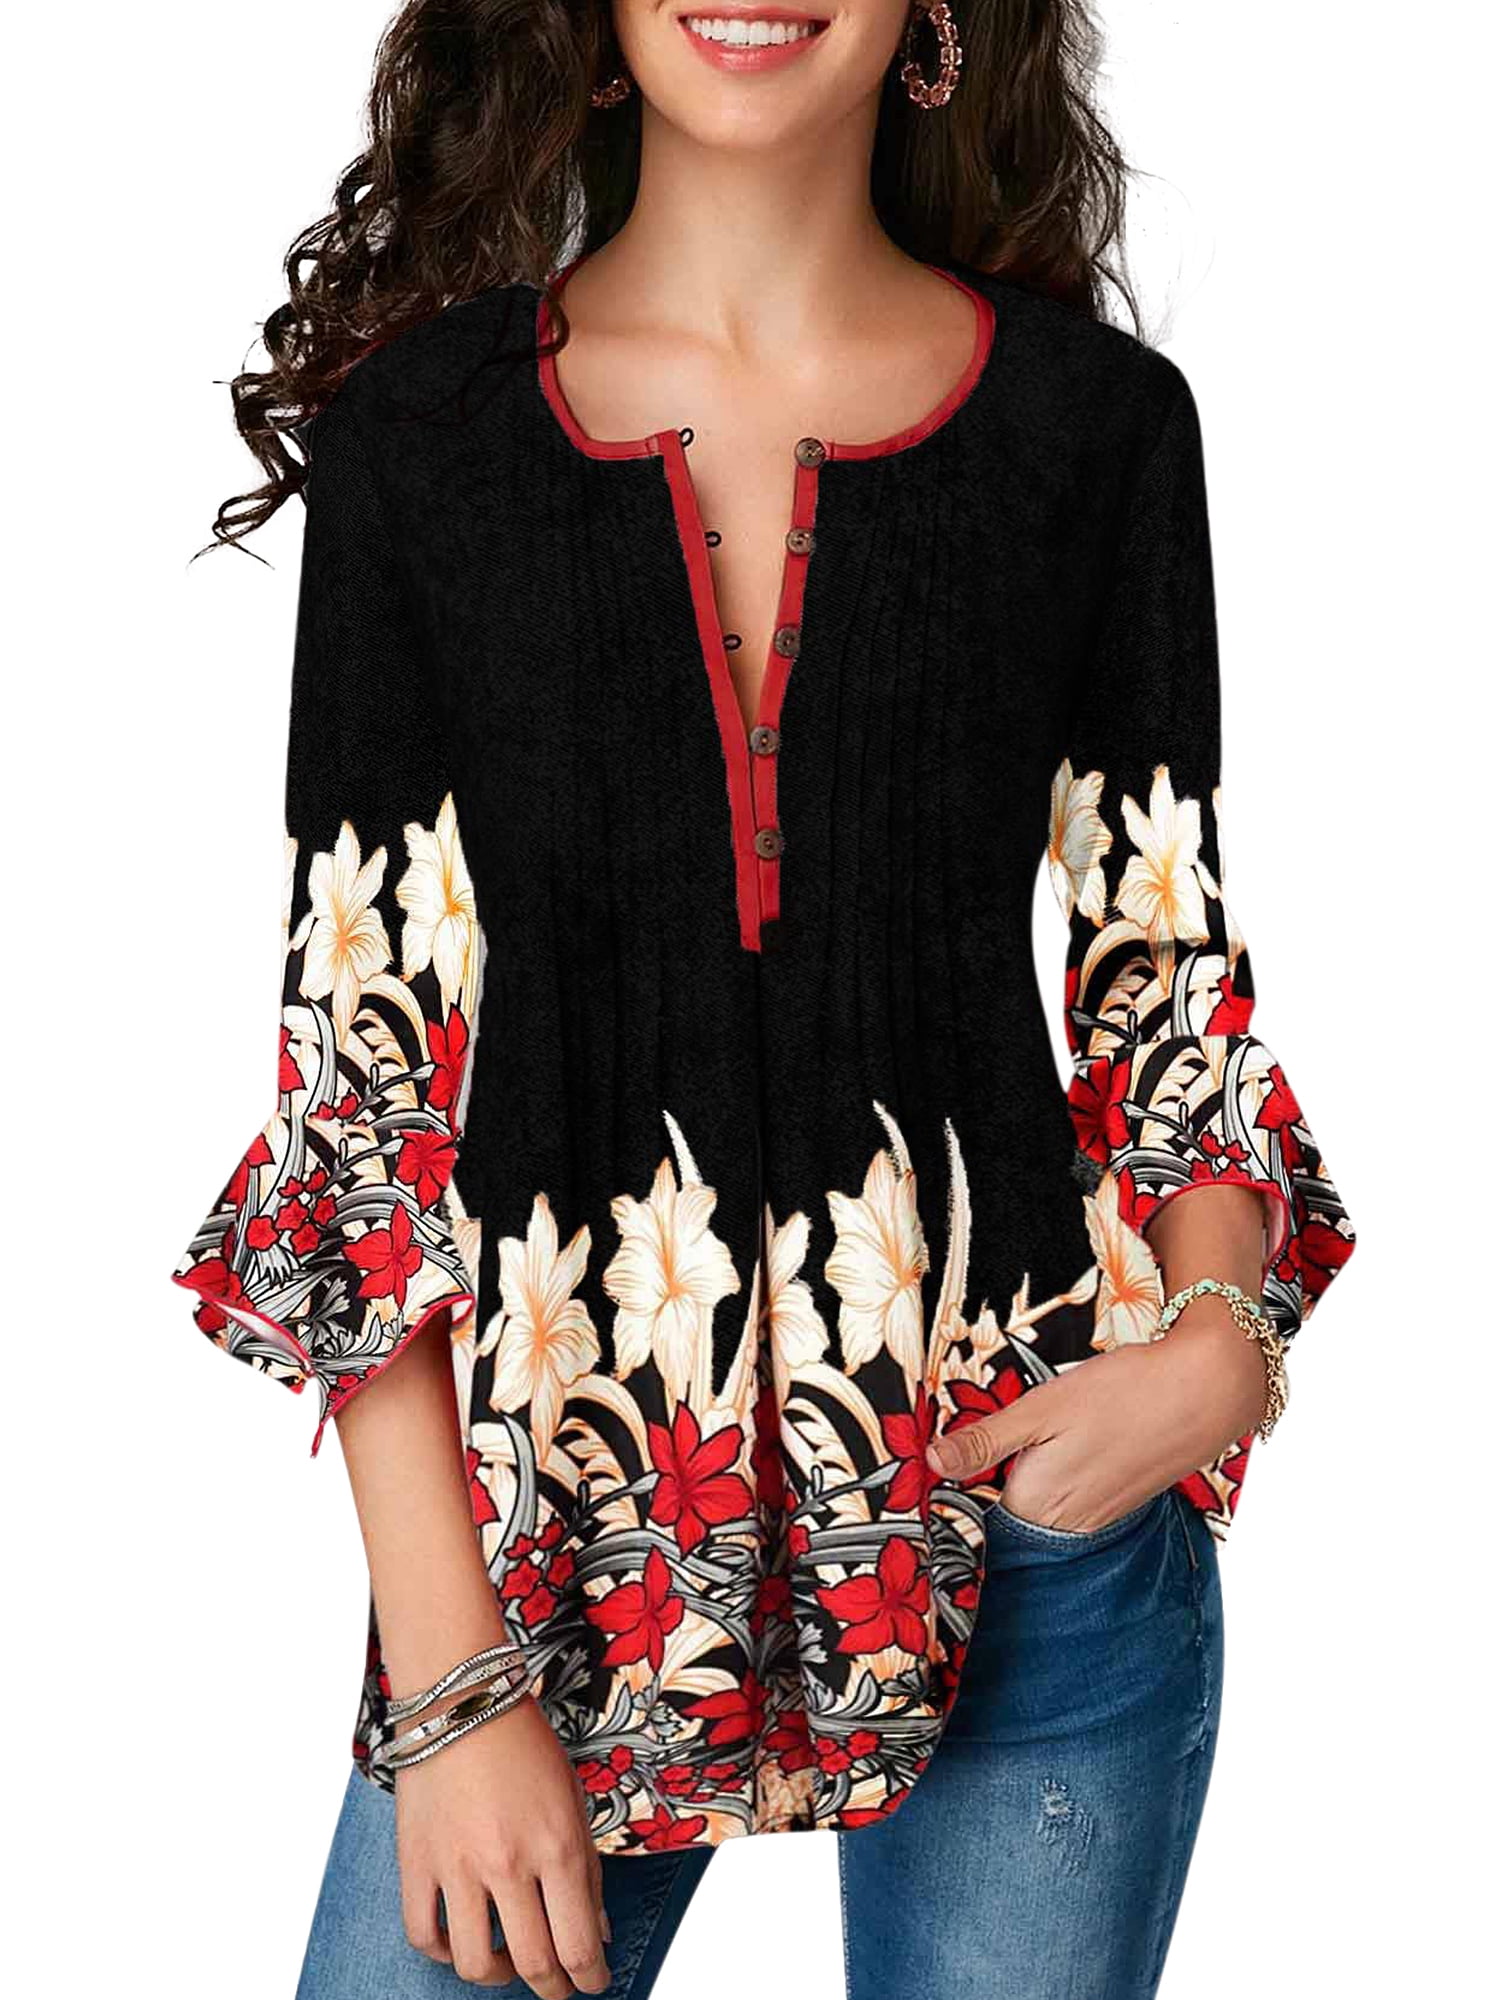 Plus Size Women's Loose Long Sleeve Floral Casual Blouse Shirt Tunic Tops Blouse 